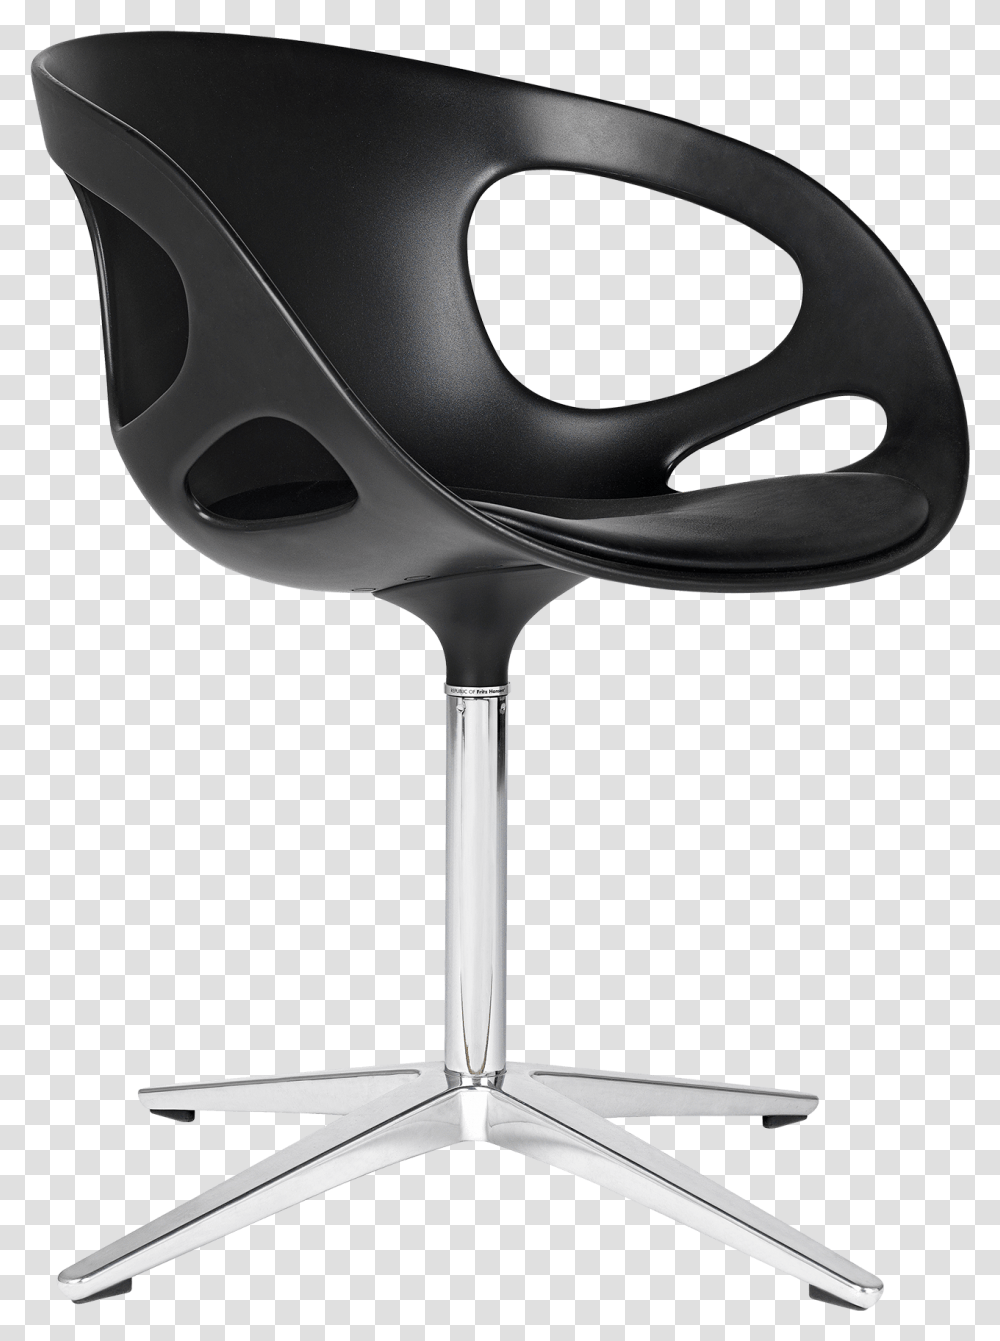 Rin Soft Leather Black Rin Stol Fritz Hansen, Chair, Furniture, Sunglasses, Accessories Transparent Png